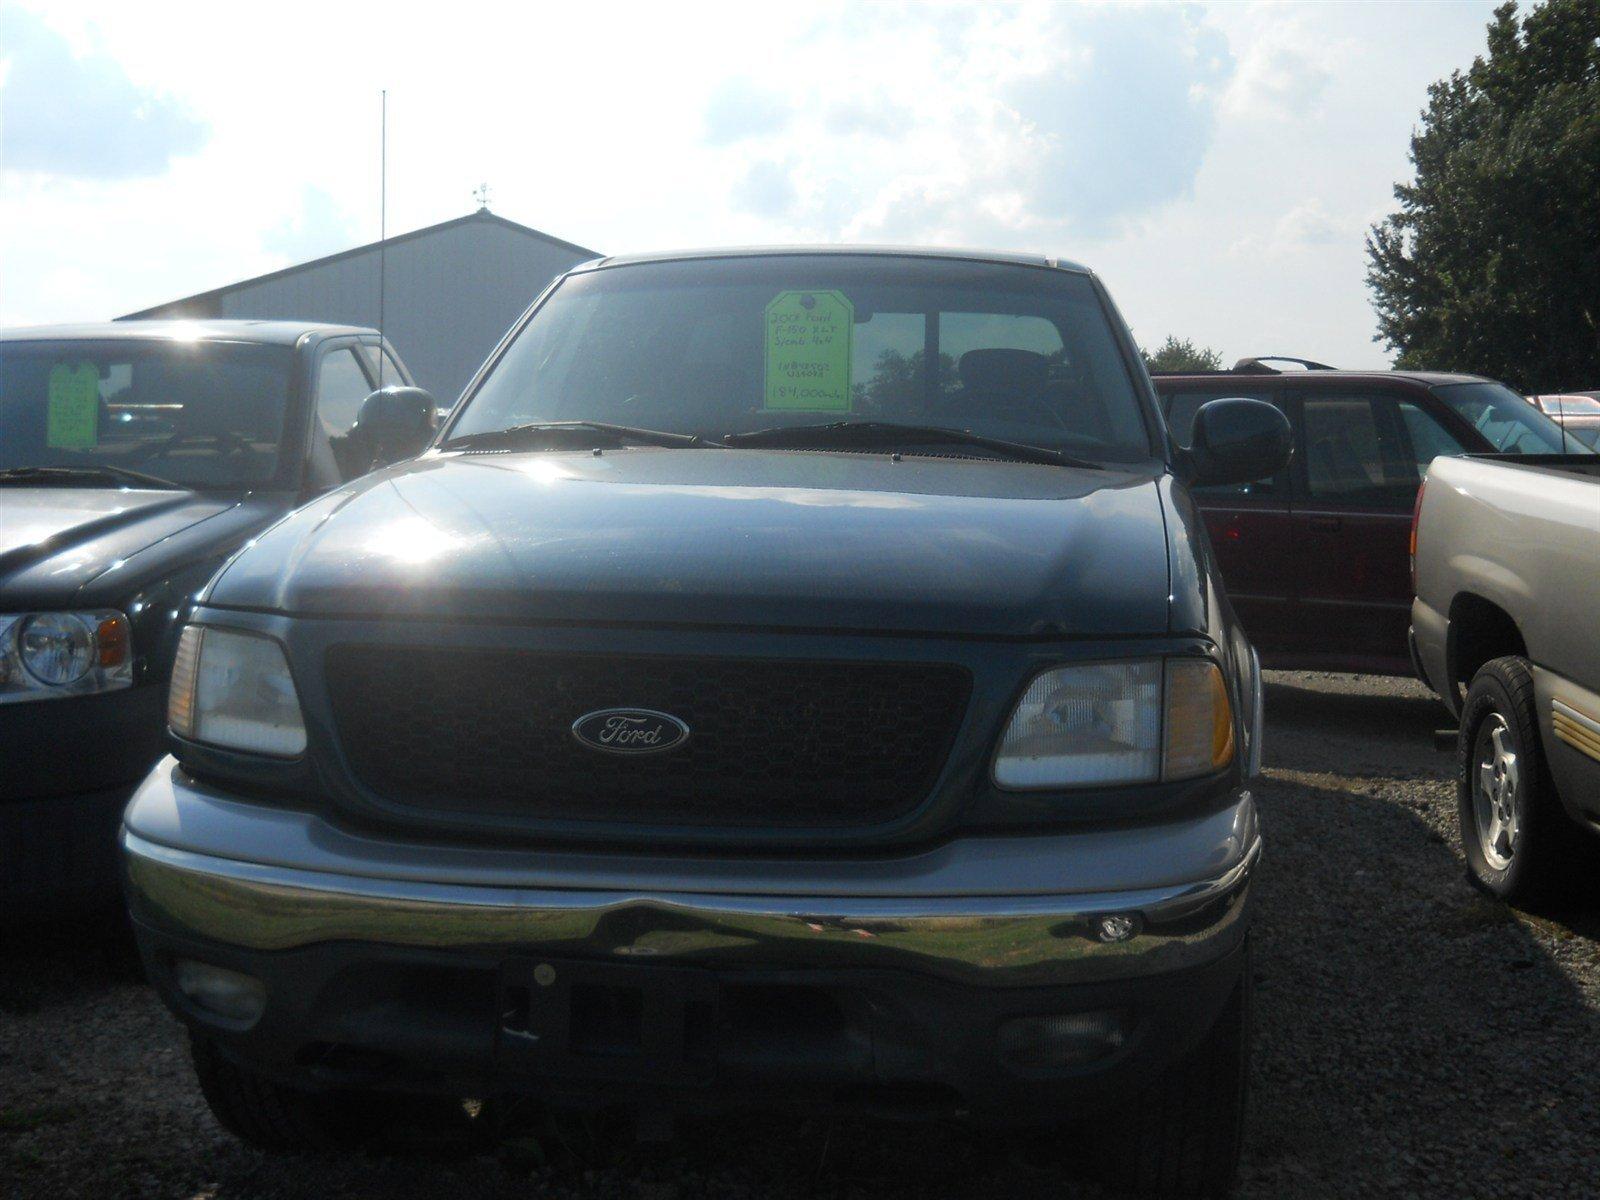 Used 2001 Ford F-150 XLT with VIN 1FTRX18WX1NB48503 for sale in Delavan, IL